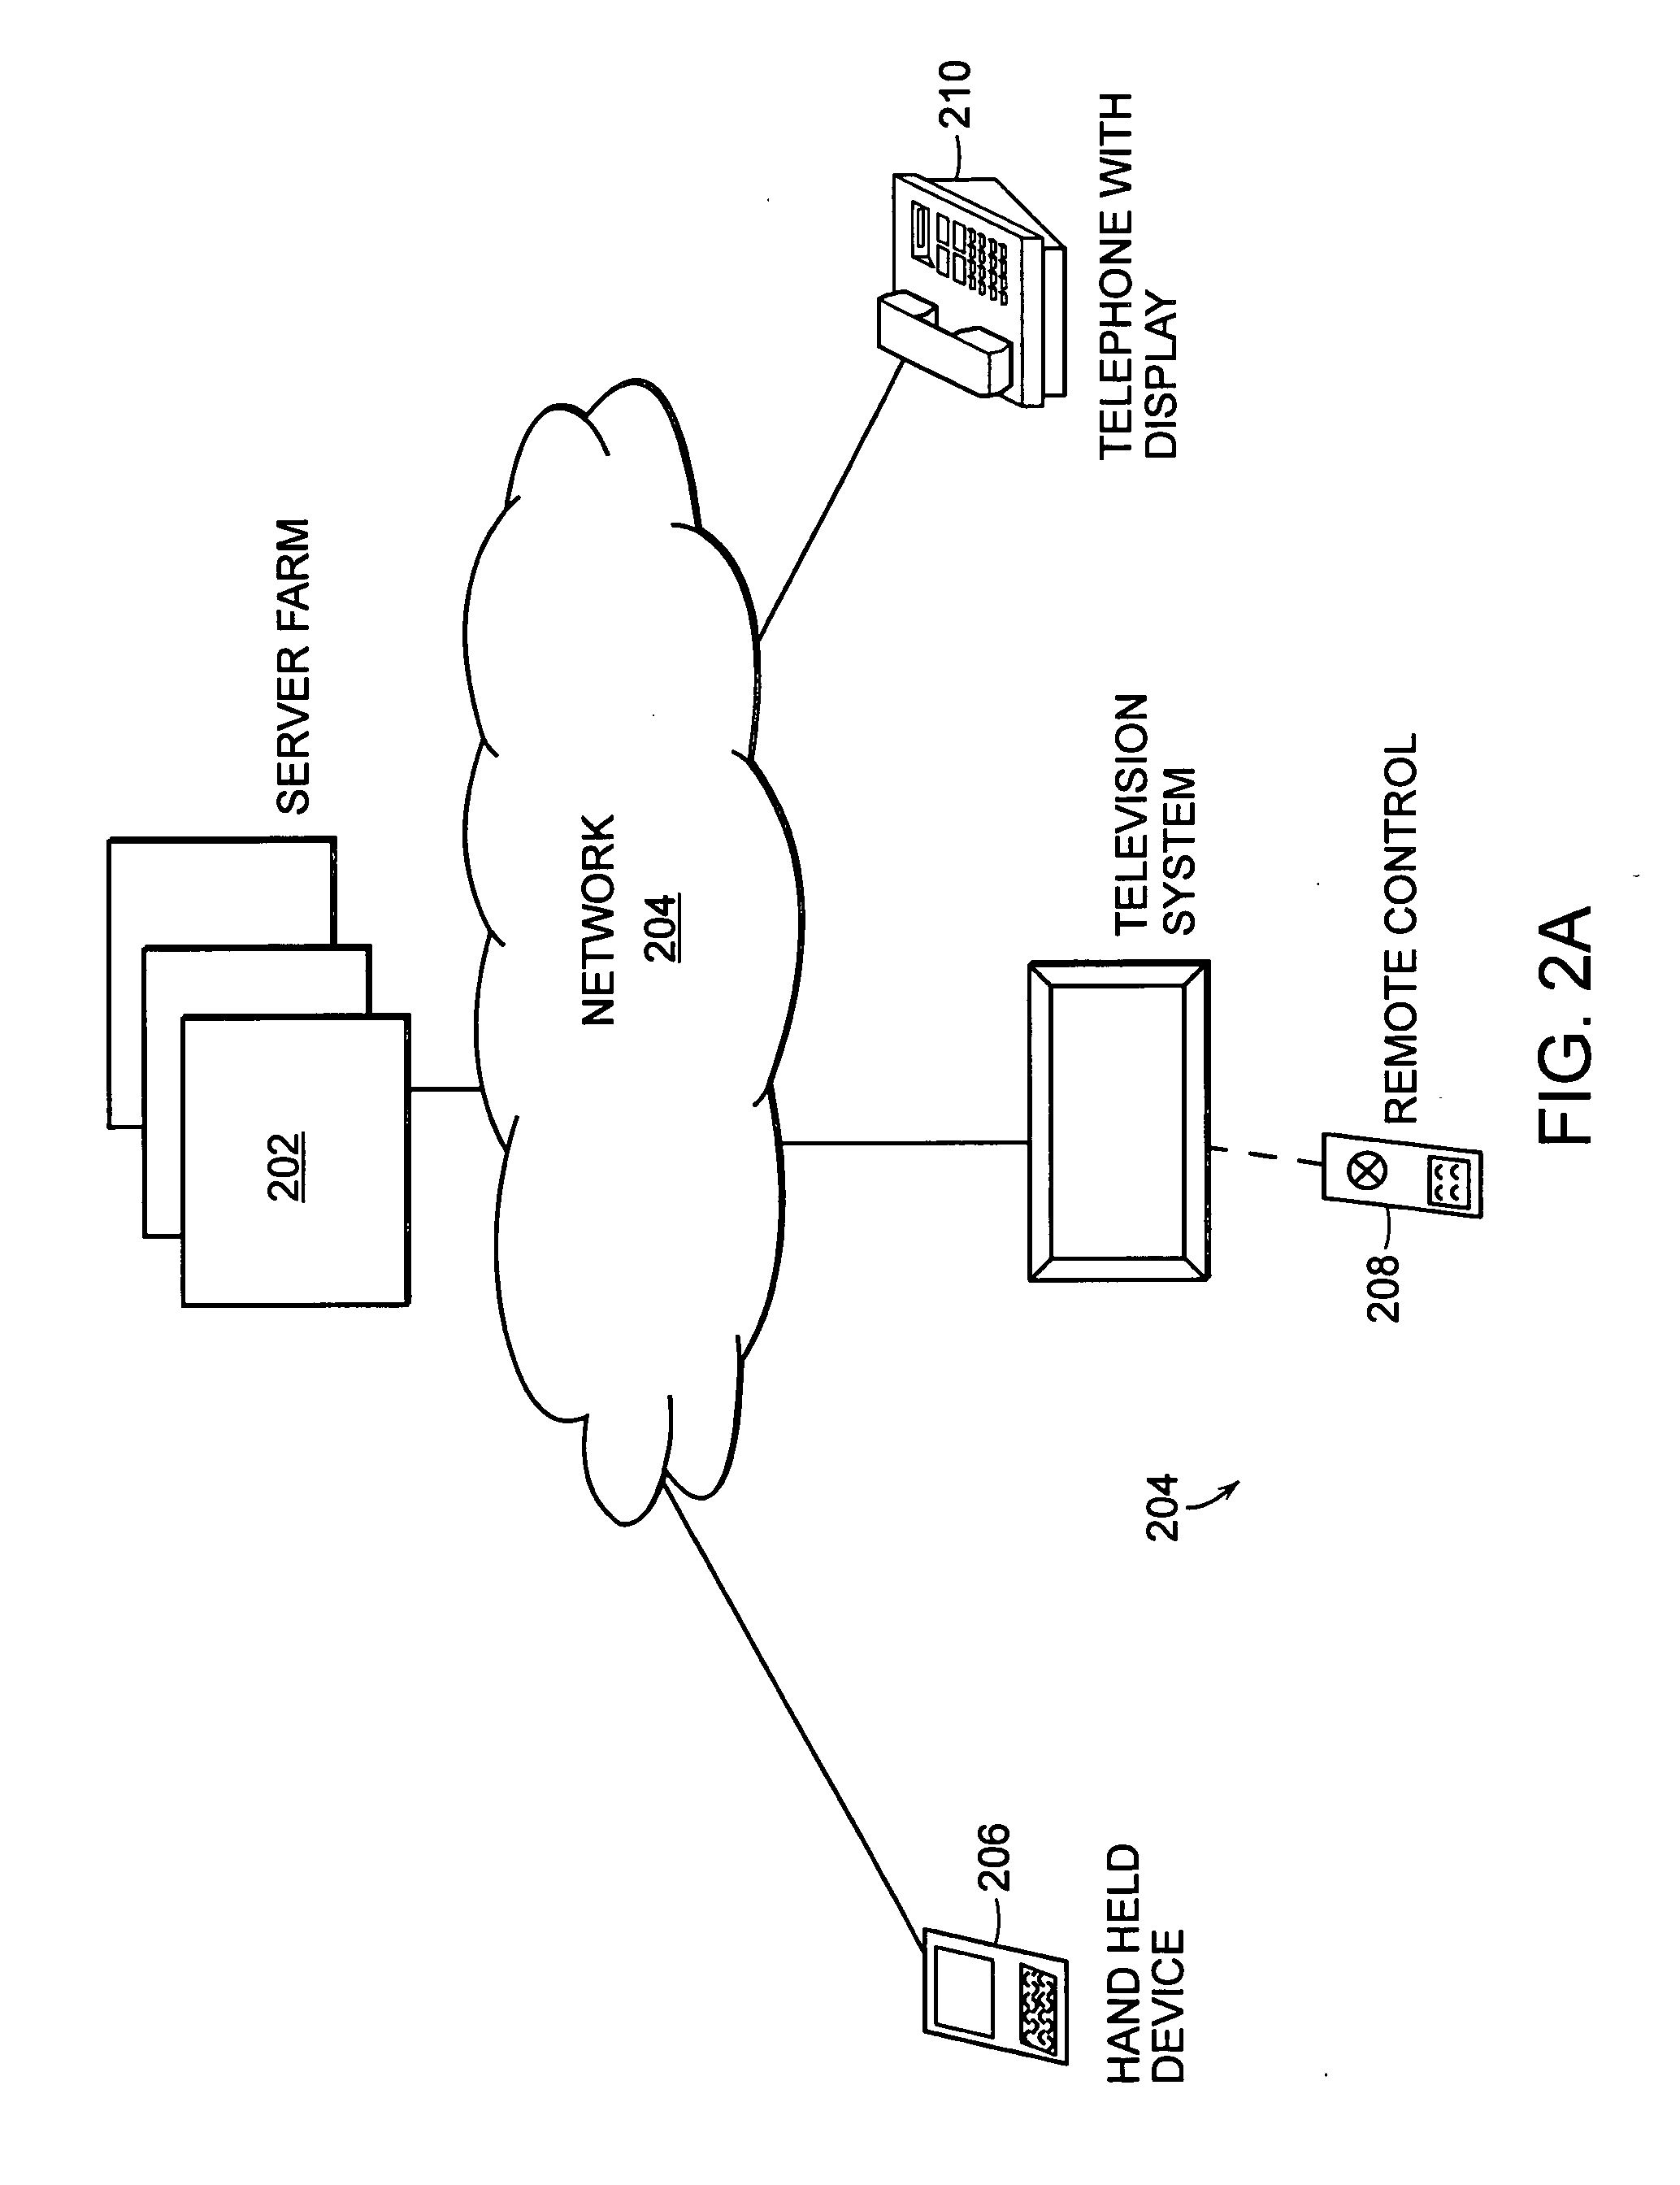 Method and system for dynamically processing ambiguous, reduced text search queries and highlighting results thereof